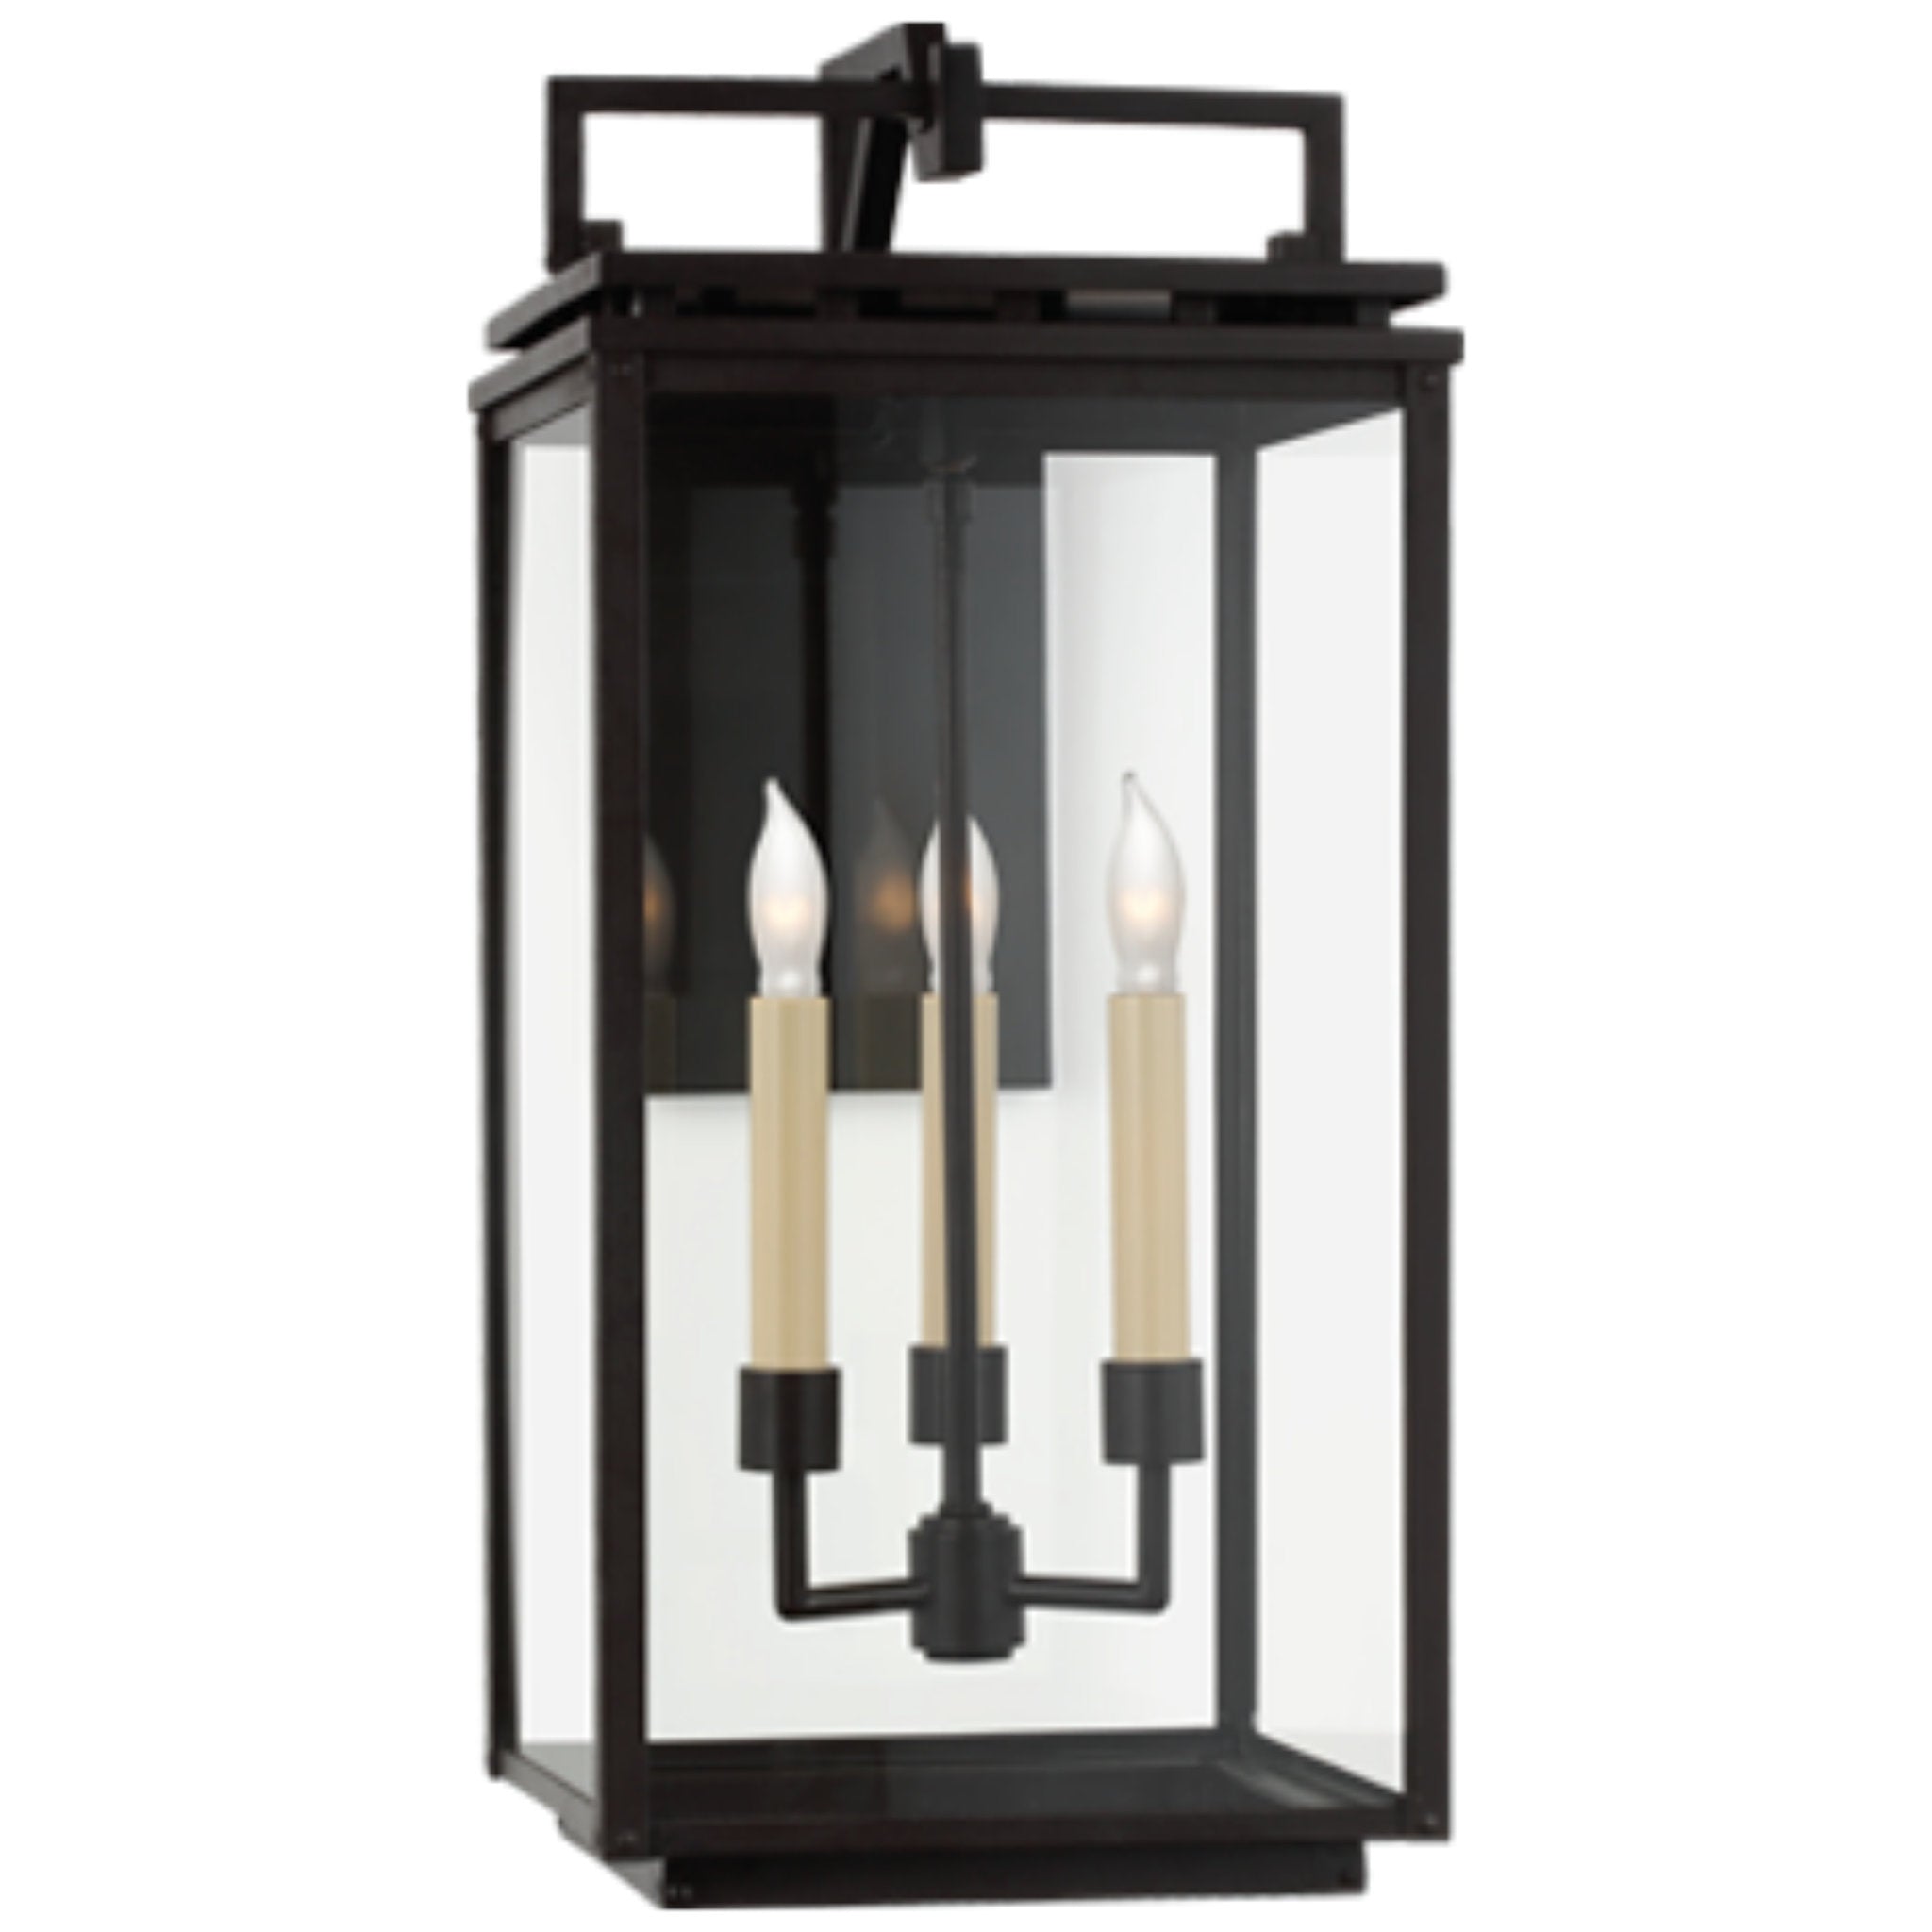 Chapman & Myers Cheshire Medium Bracketed Wall Lantern in Aged Iron with Clear Glass